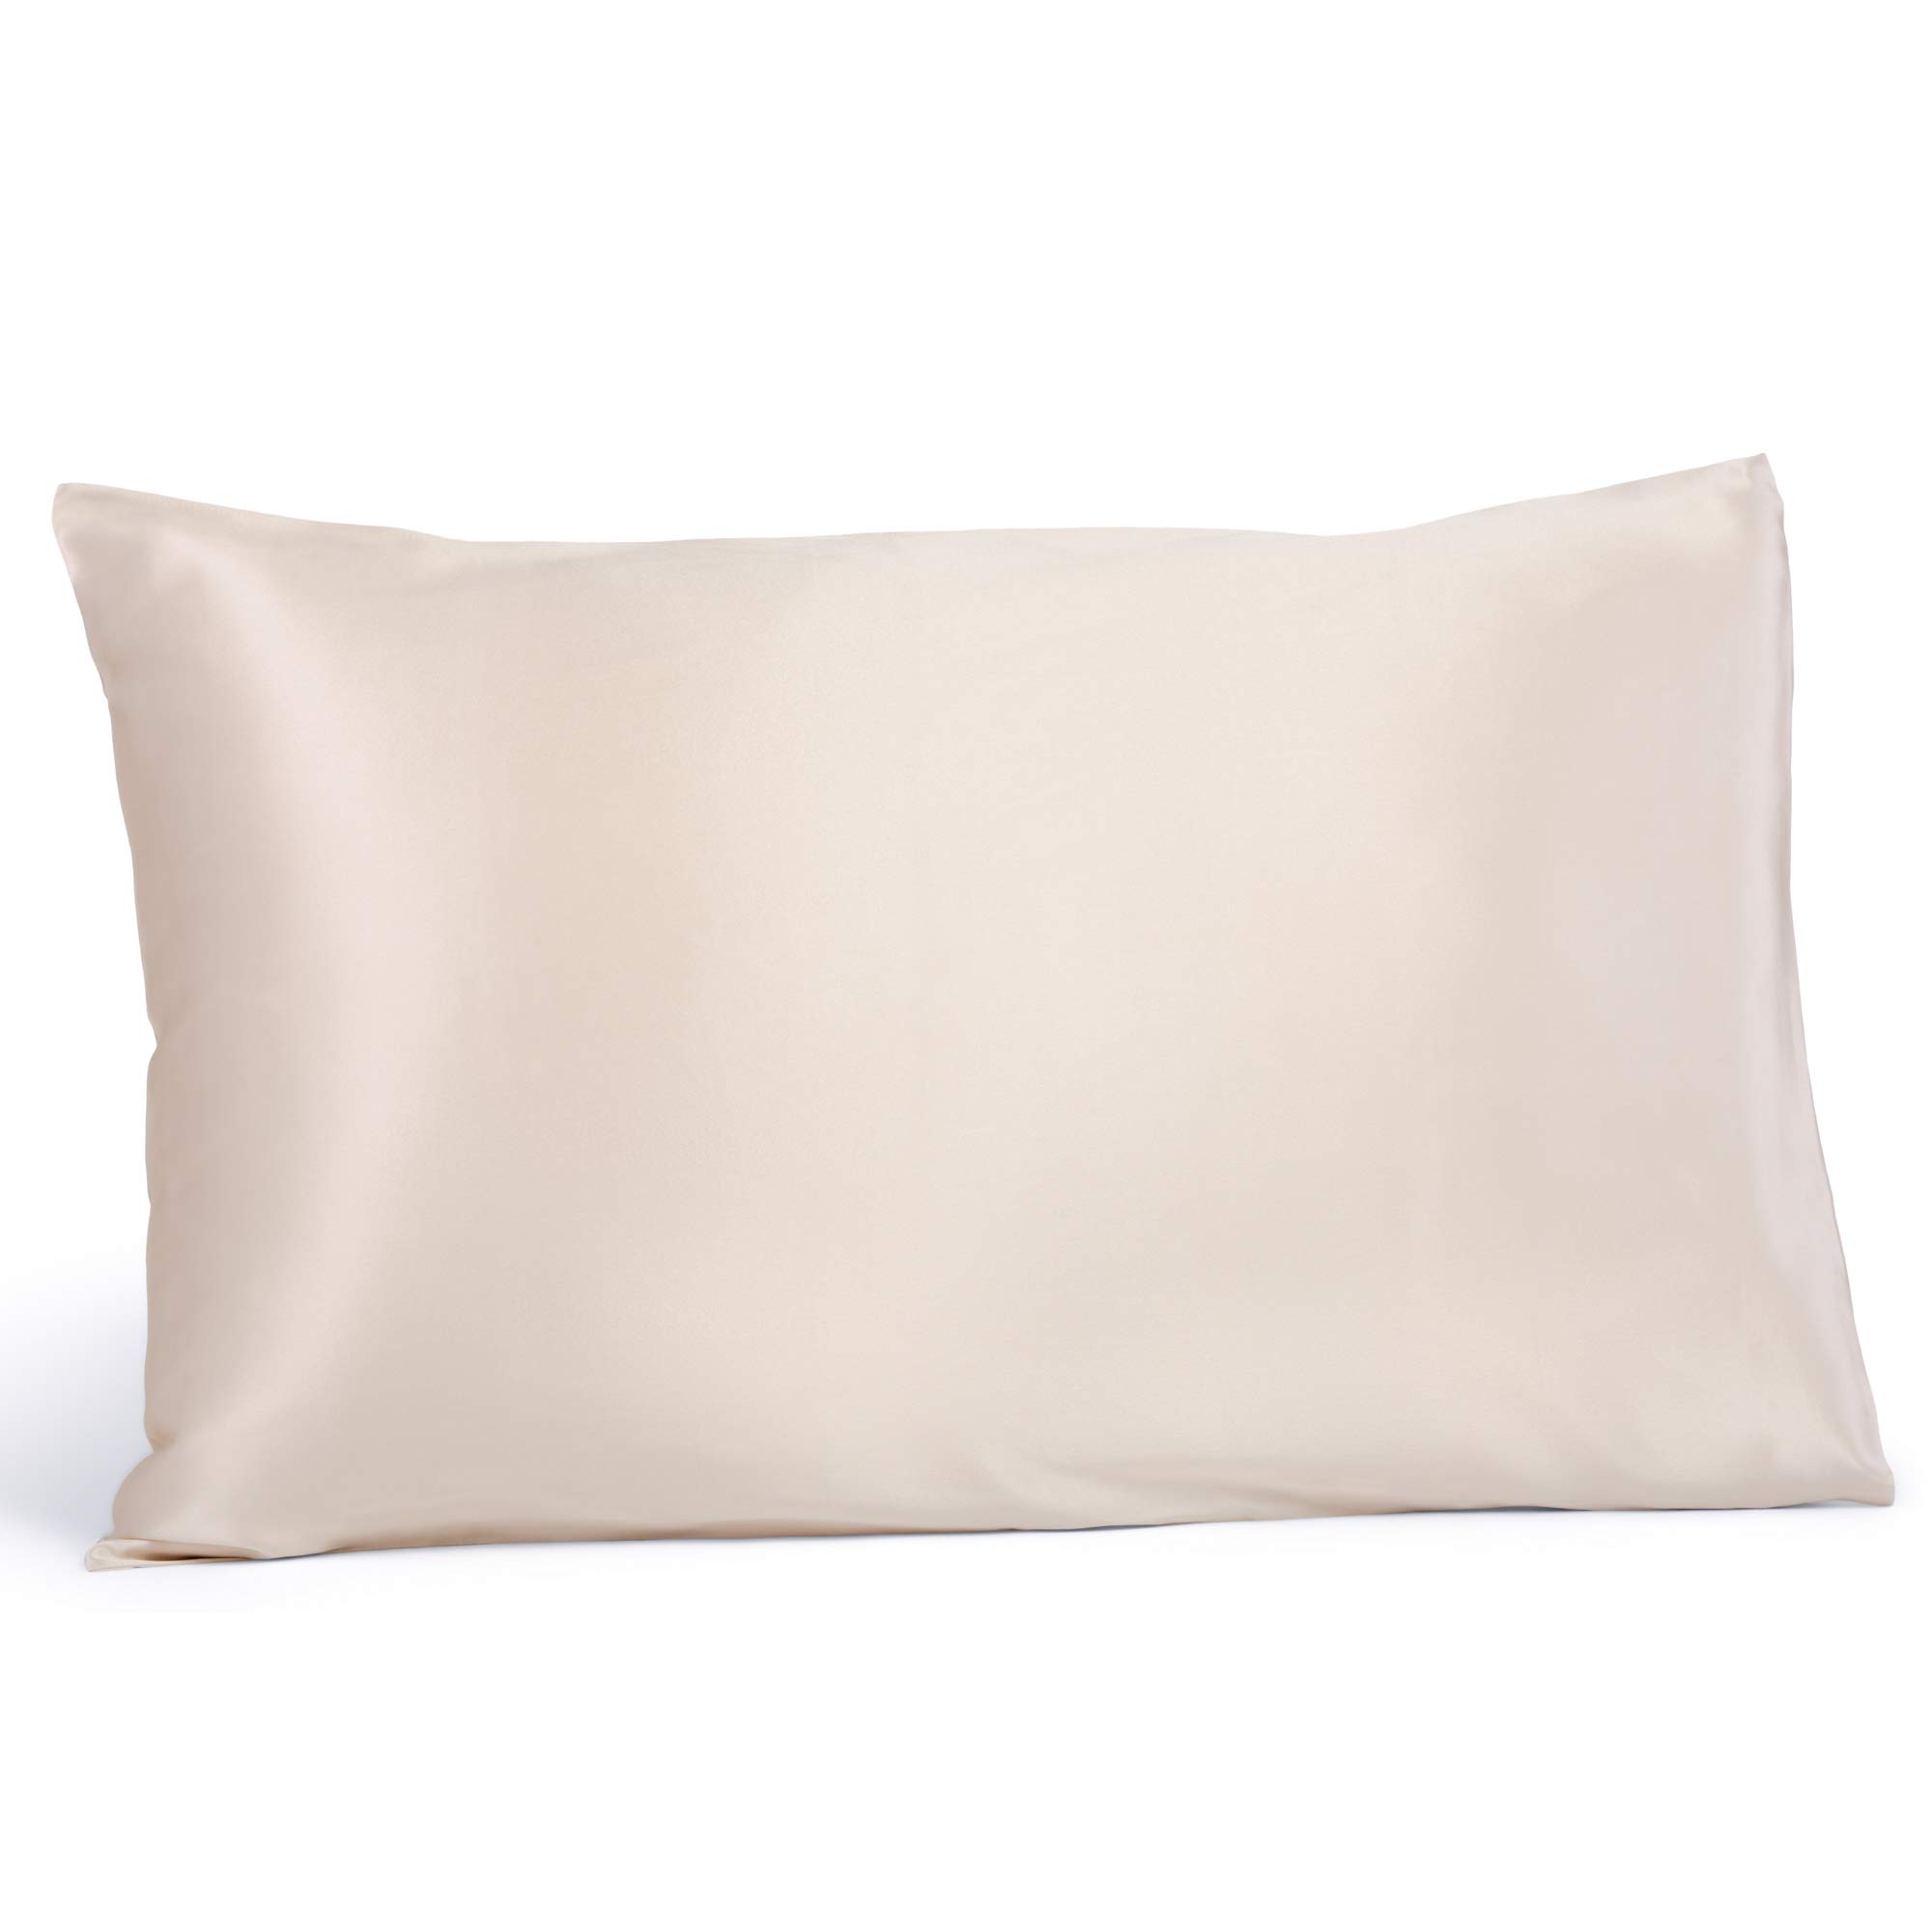 Fishers Finery 25mm 100% Pure Mulberry Silk Pillowcase, Good Housekeeping Winner (Taupe, King)